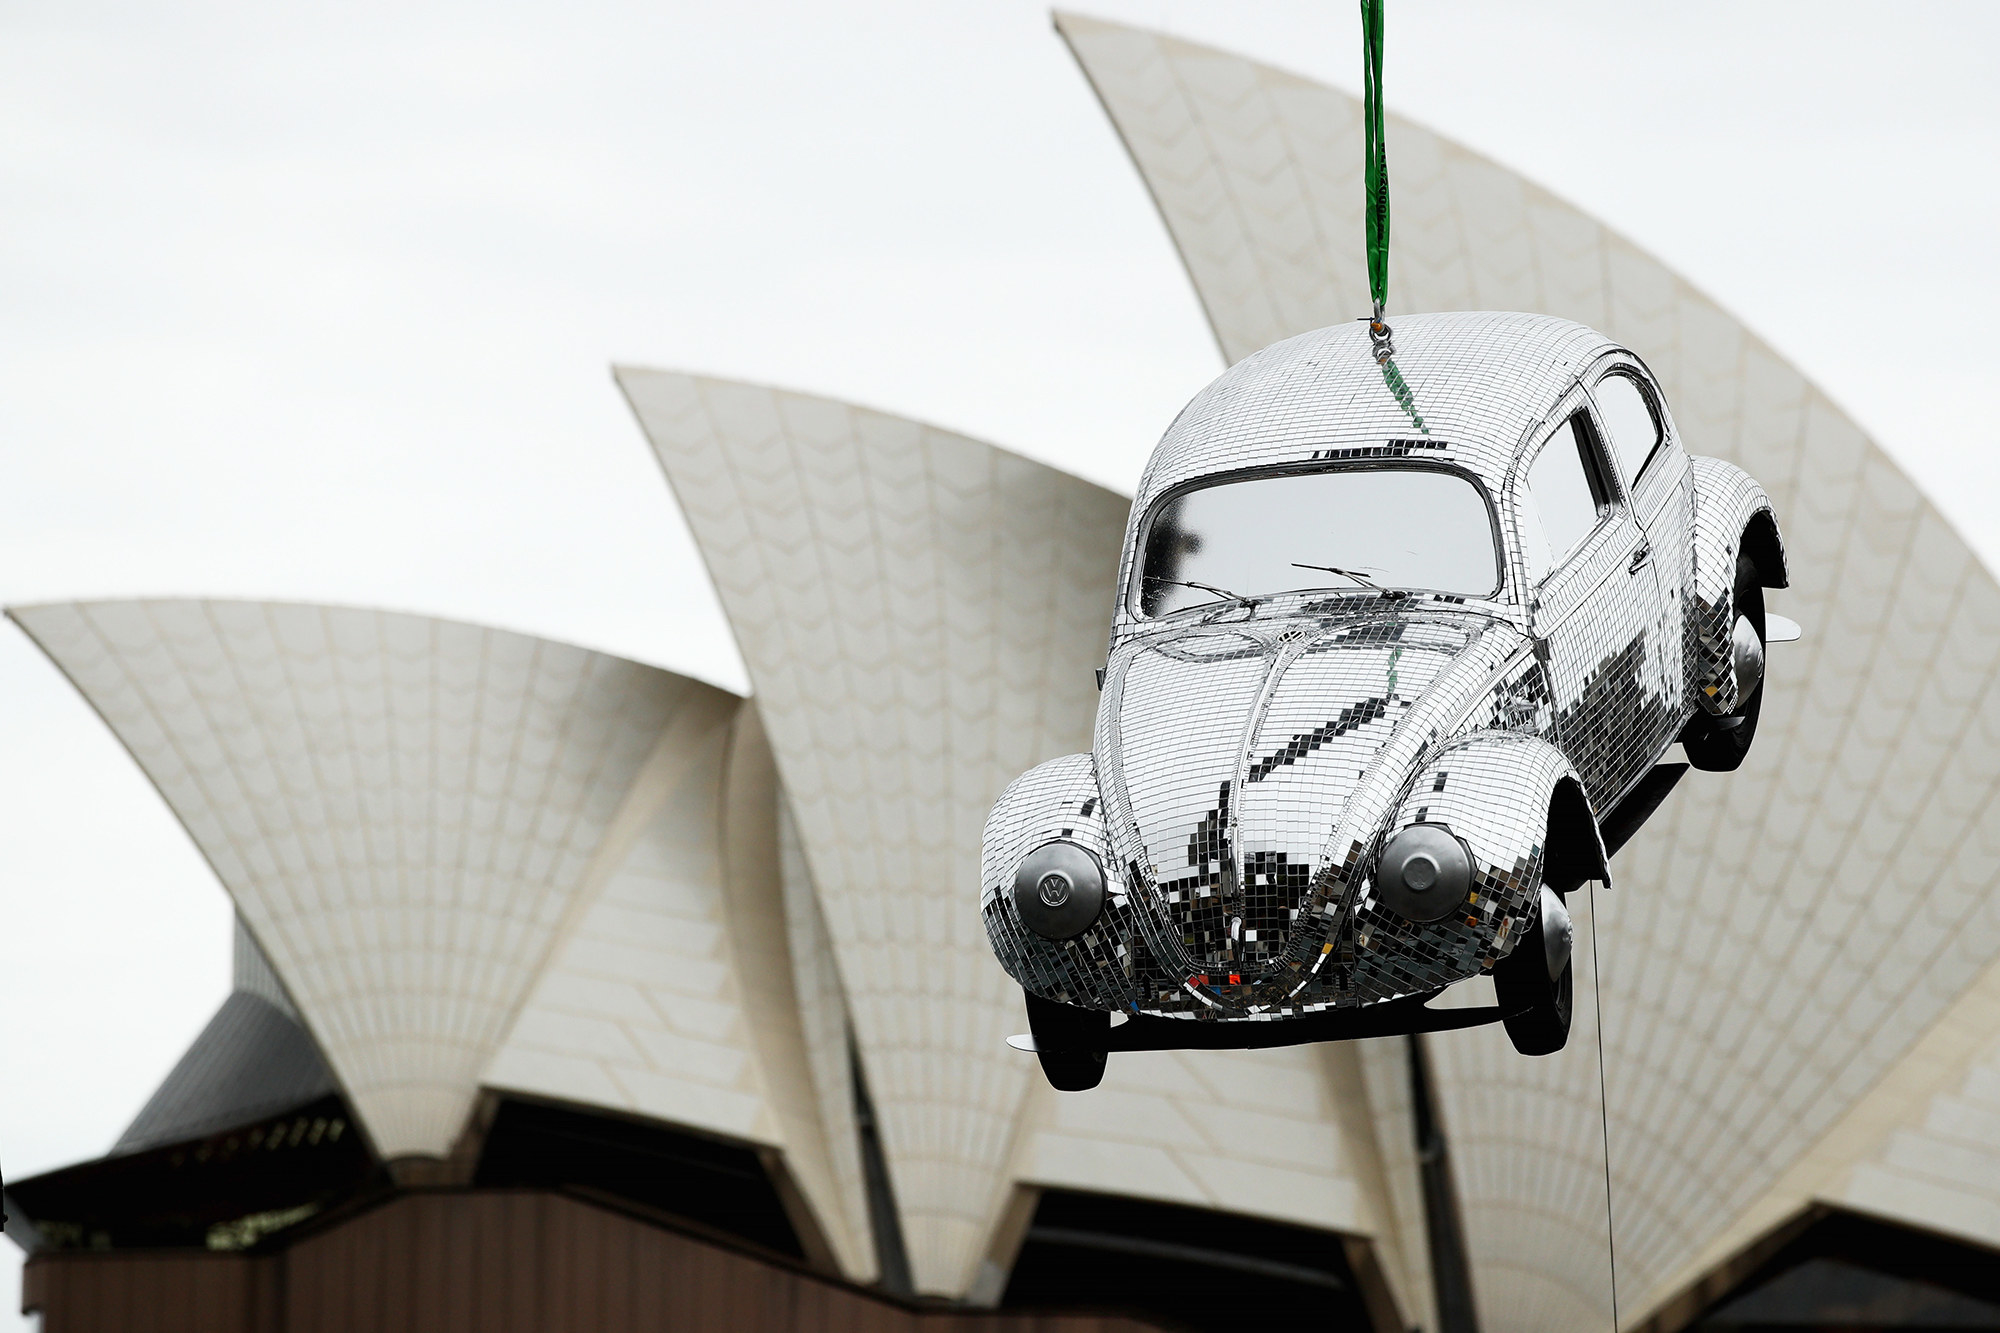 Sydney opera house in the background; floating sparkly Volkswagen in the foreground